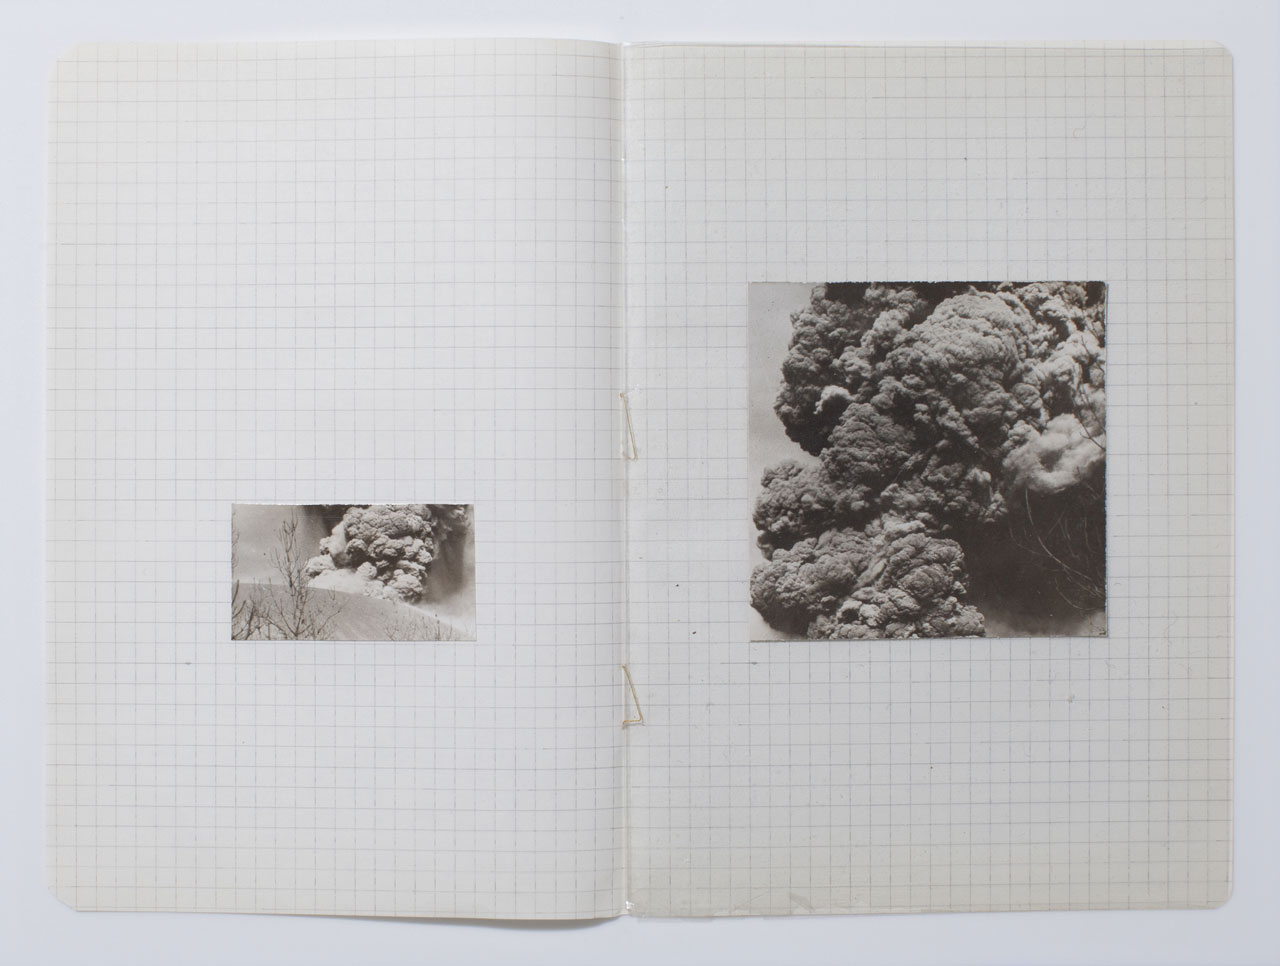 Harar Waheed, 'KH-21', Notes 29/32, 2014, Cut Photograph, Mylar & Thread on Paper. Image courtesy the artist.